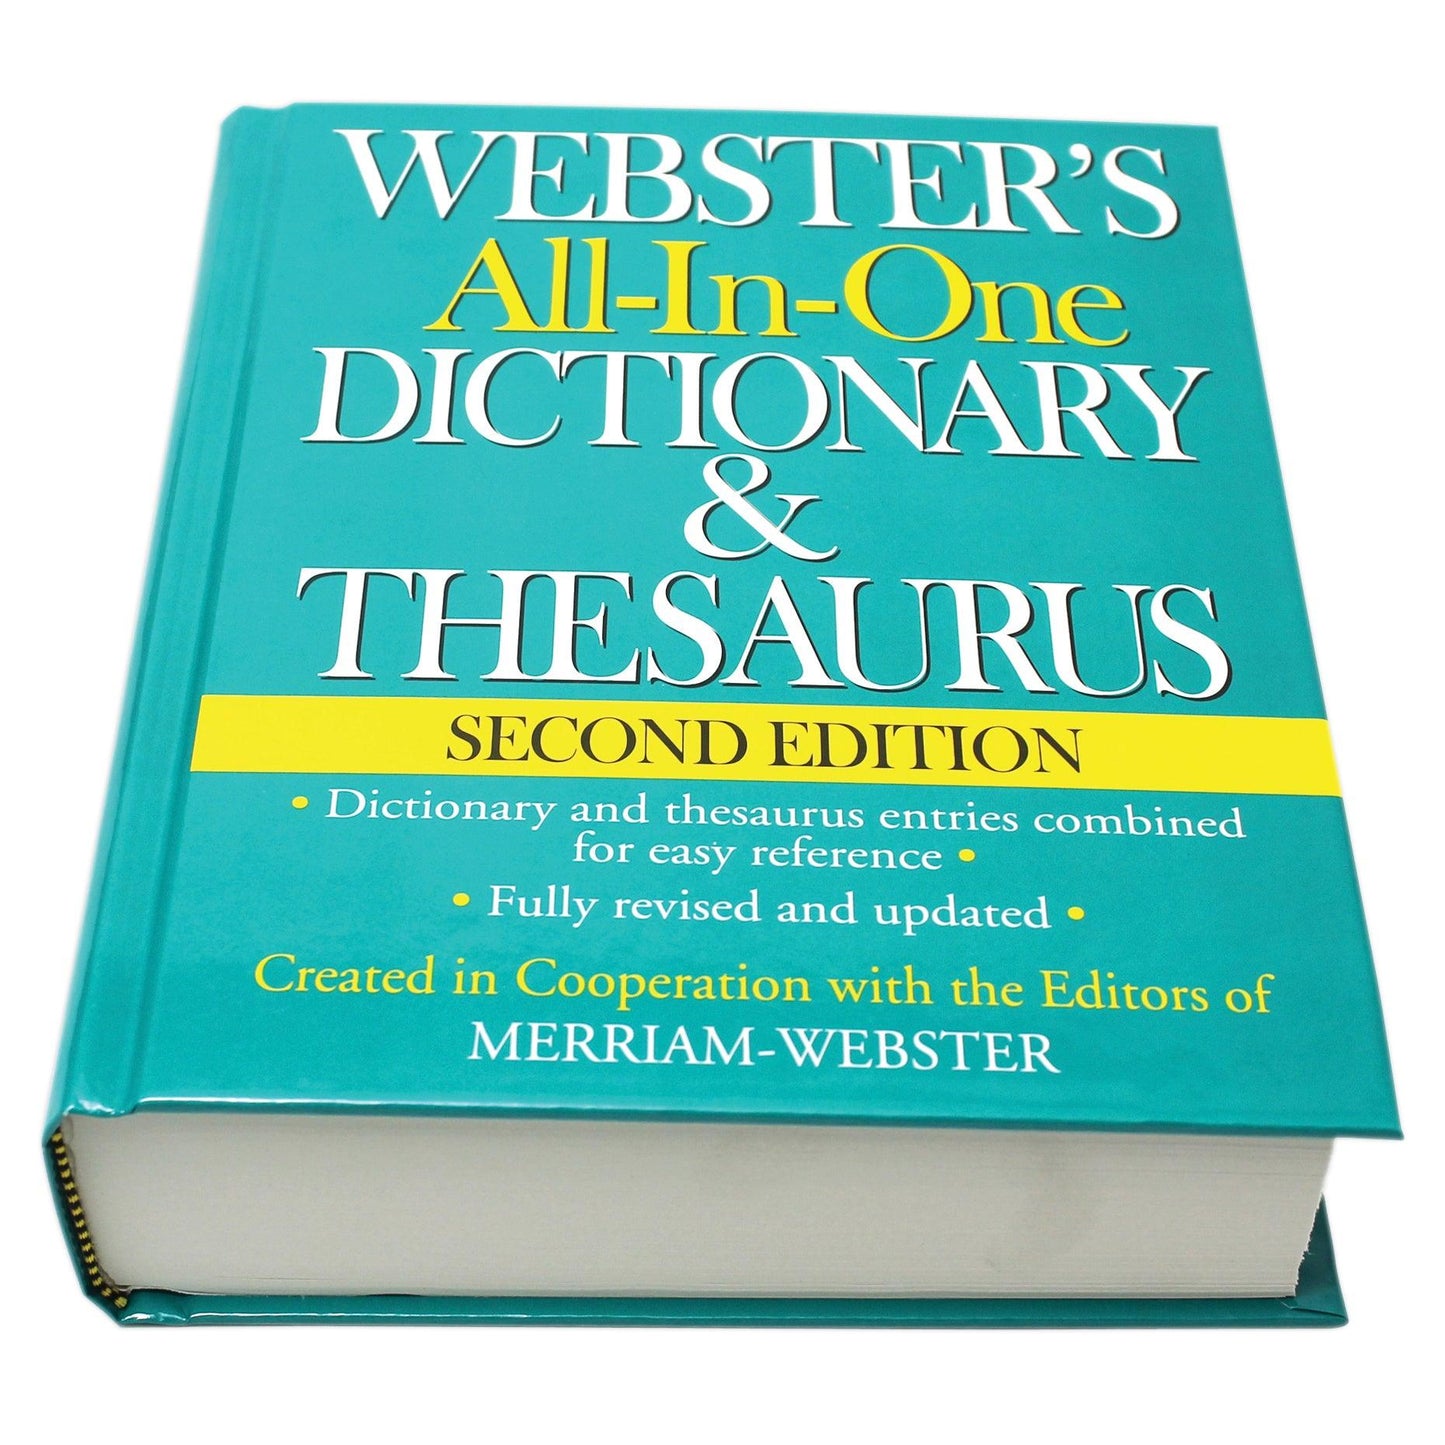 Webster's All-in-One Dictionary & Thesaurus, Second Edition - Loomini